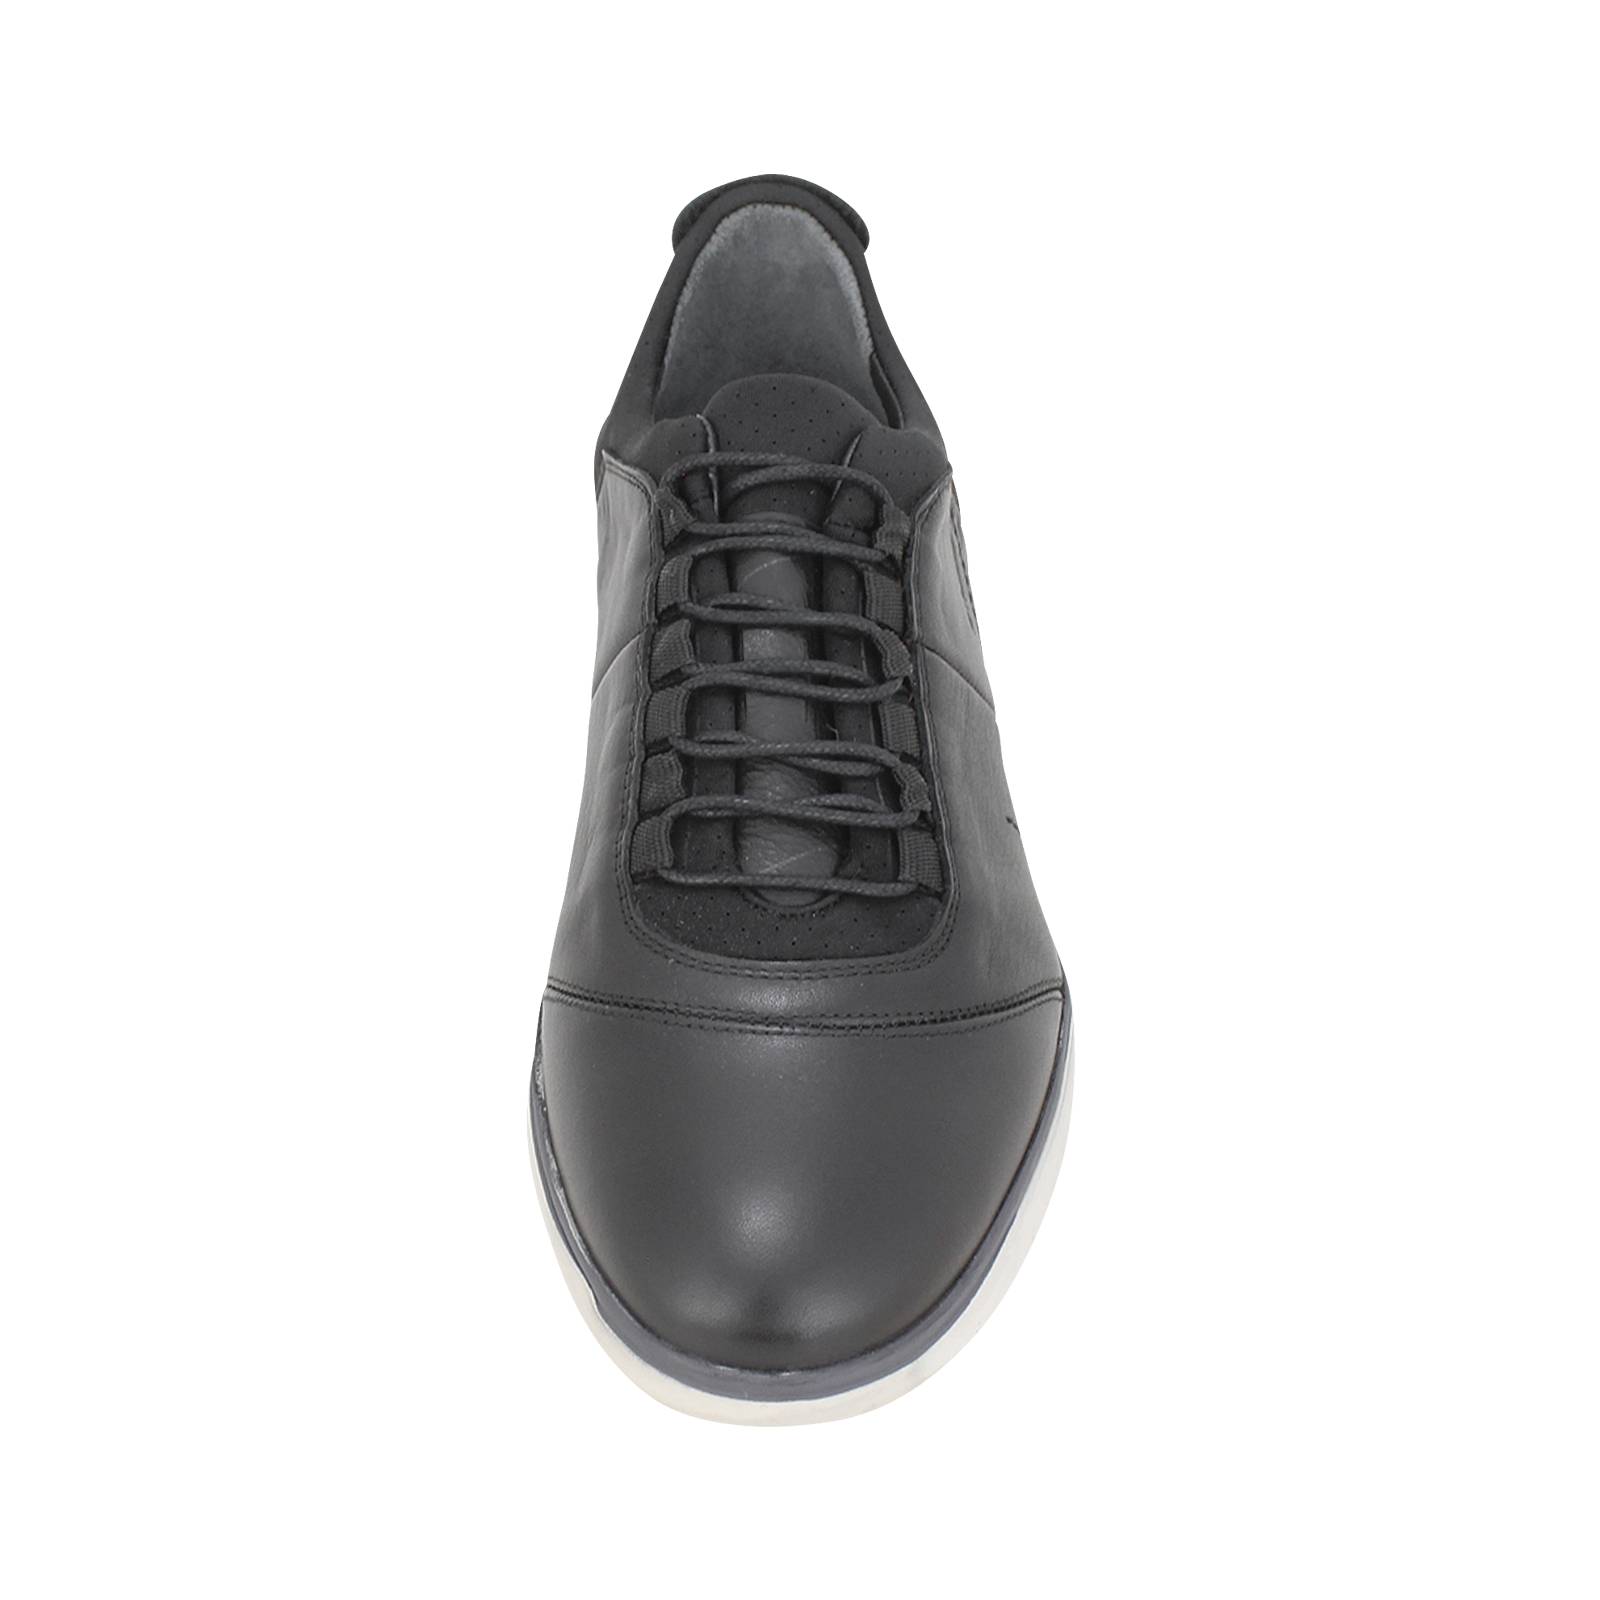 Cordelle - GK Uomo Men's casual shoes made of leather and fabric ...